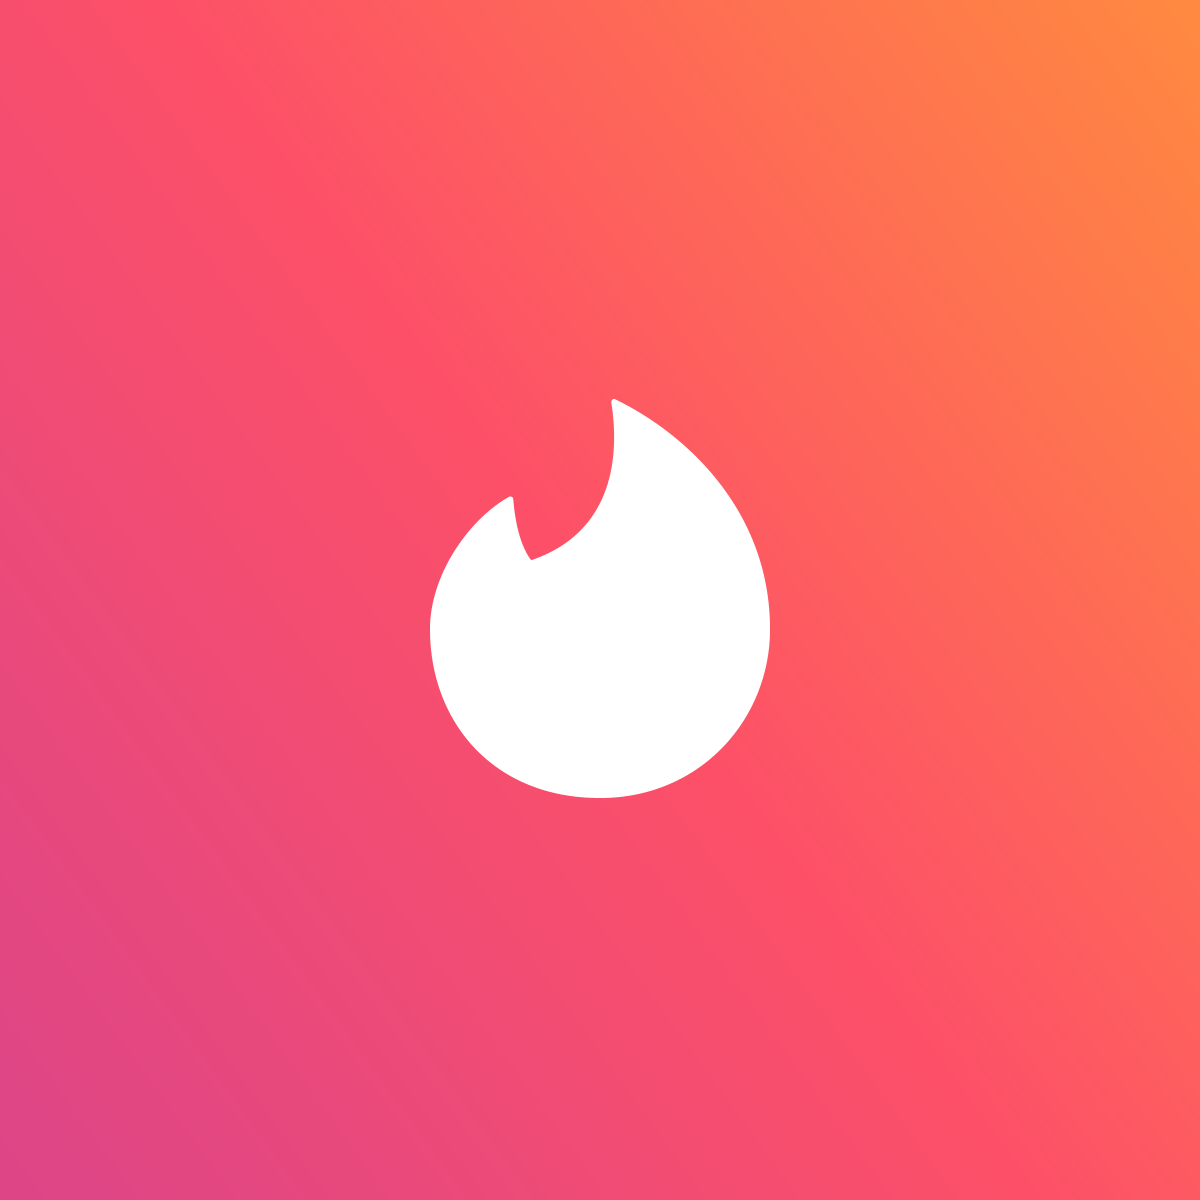 Tinder dating app per Android